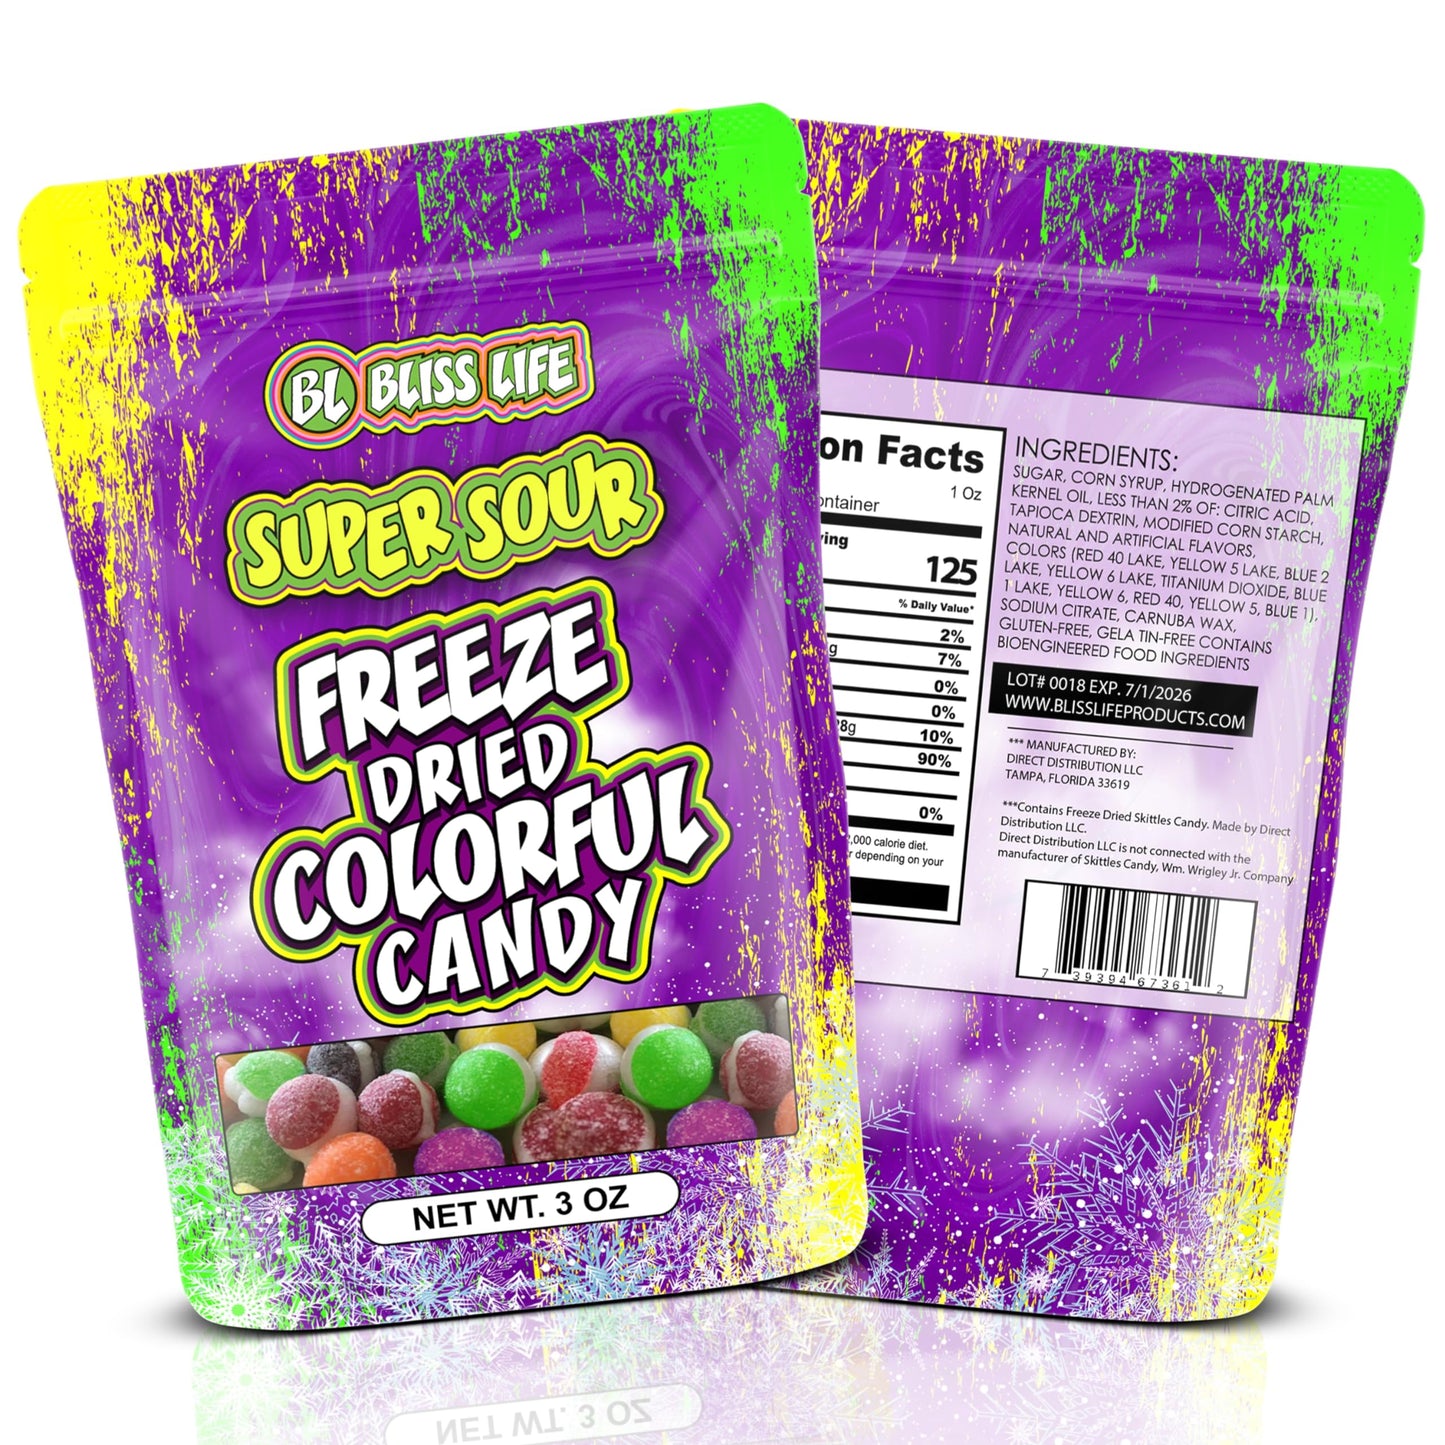 3 Flavor Variety Pack of Bliss Life Freeze Dried Colorful Candy Bliss